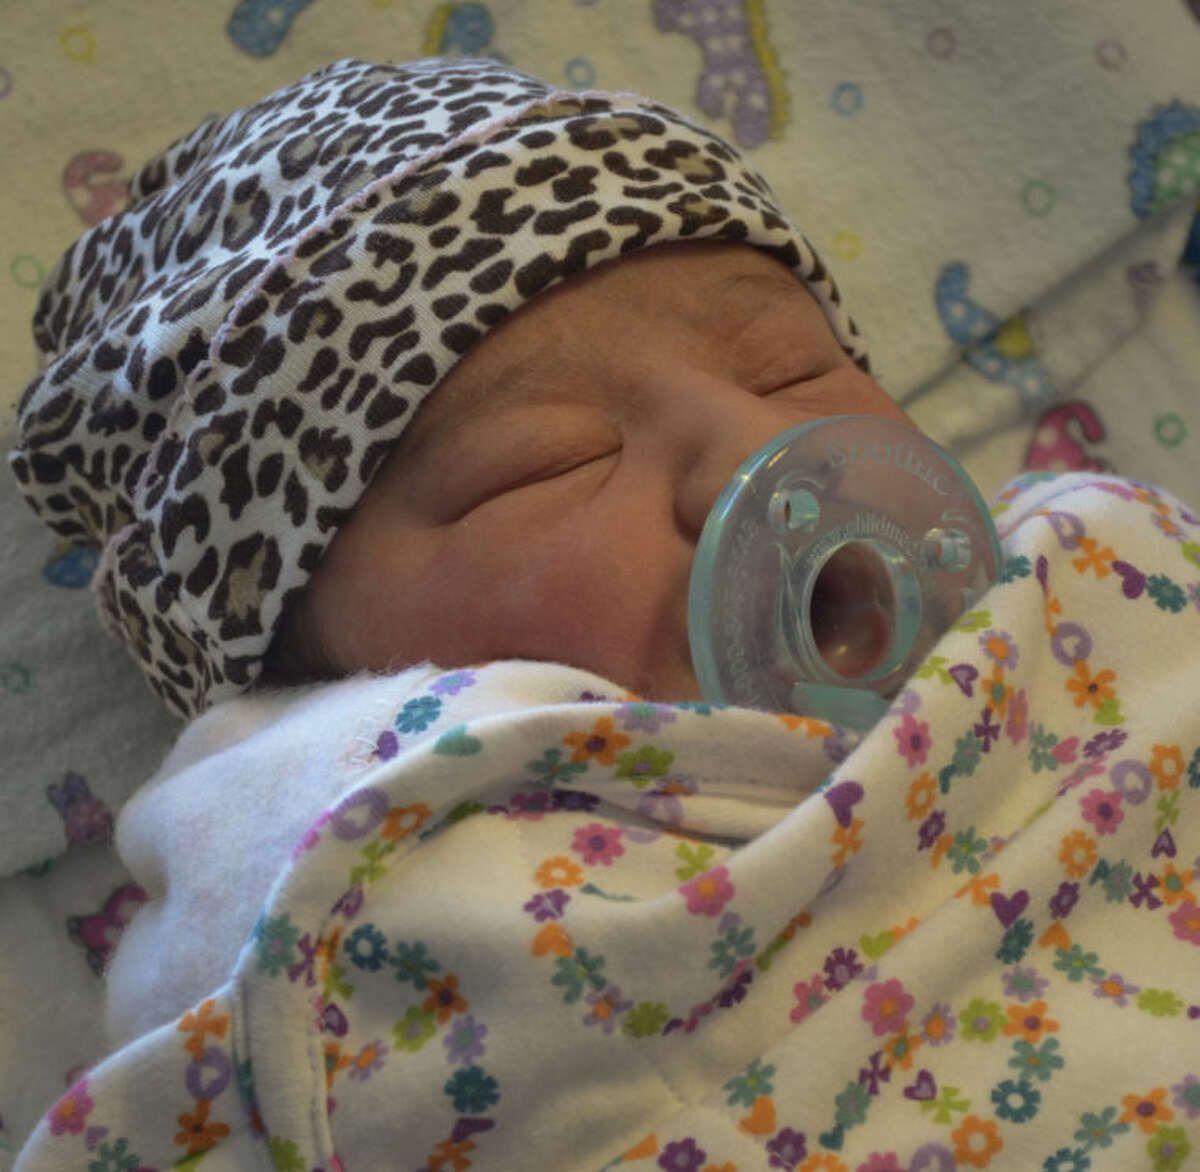 The last baby born in Midland in 2013 is Analayah Esquivel, born at 5:40 Tuesday evening. Tim Fischer\Reporter-Telegram